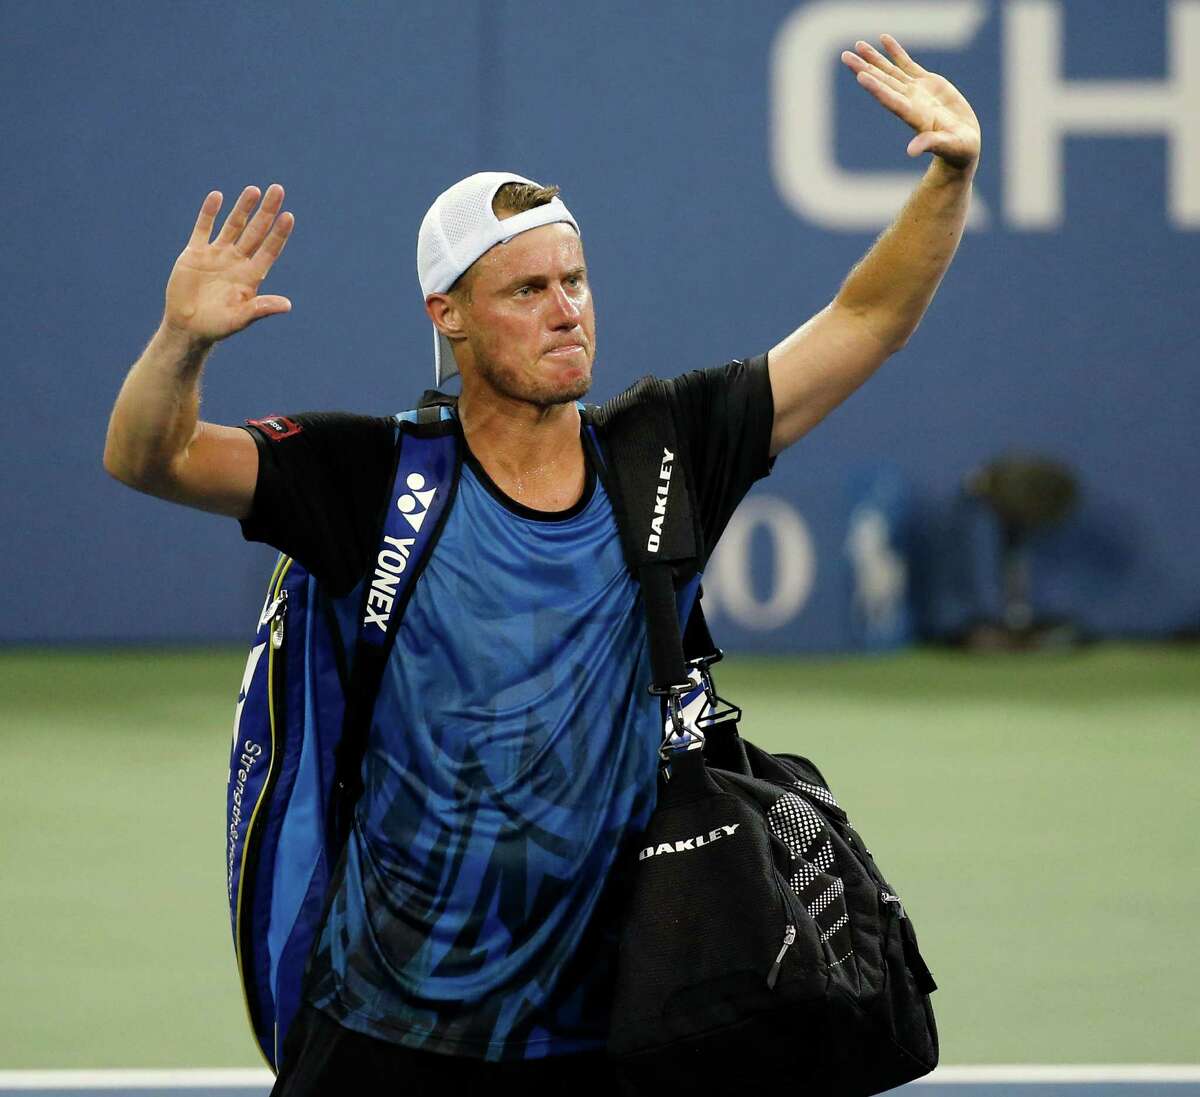 Lleyton Hewitt, of Australia, bids farewell to the crowd after losing to countryman Bernard Tomic, 6-3, 6-2, 3-6, 5-7, 7-5, during the second round of the U.S. Open tennis tournament in New York, Thursday, Sept. 3, 2015. (AP Photo/Kathy Willens)